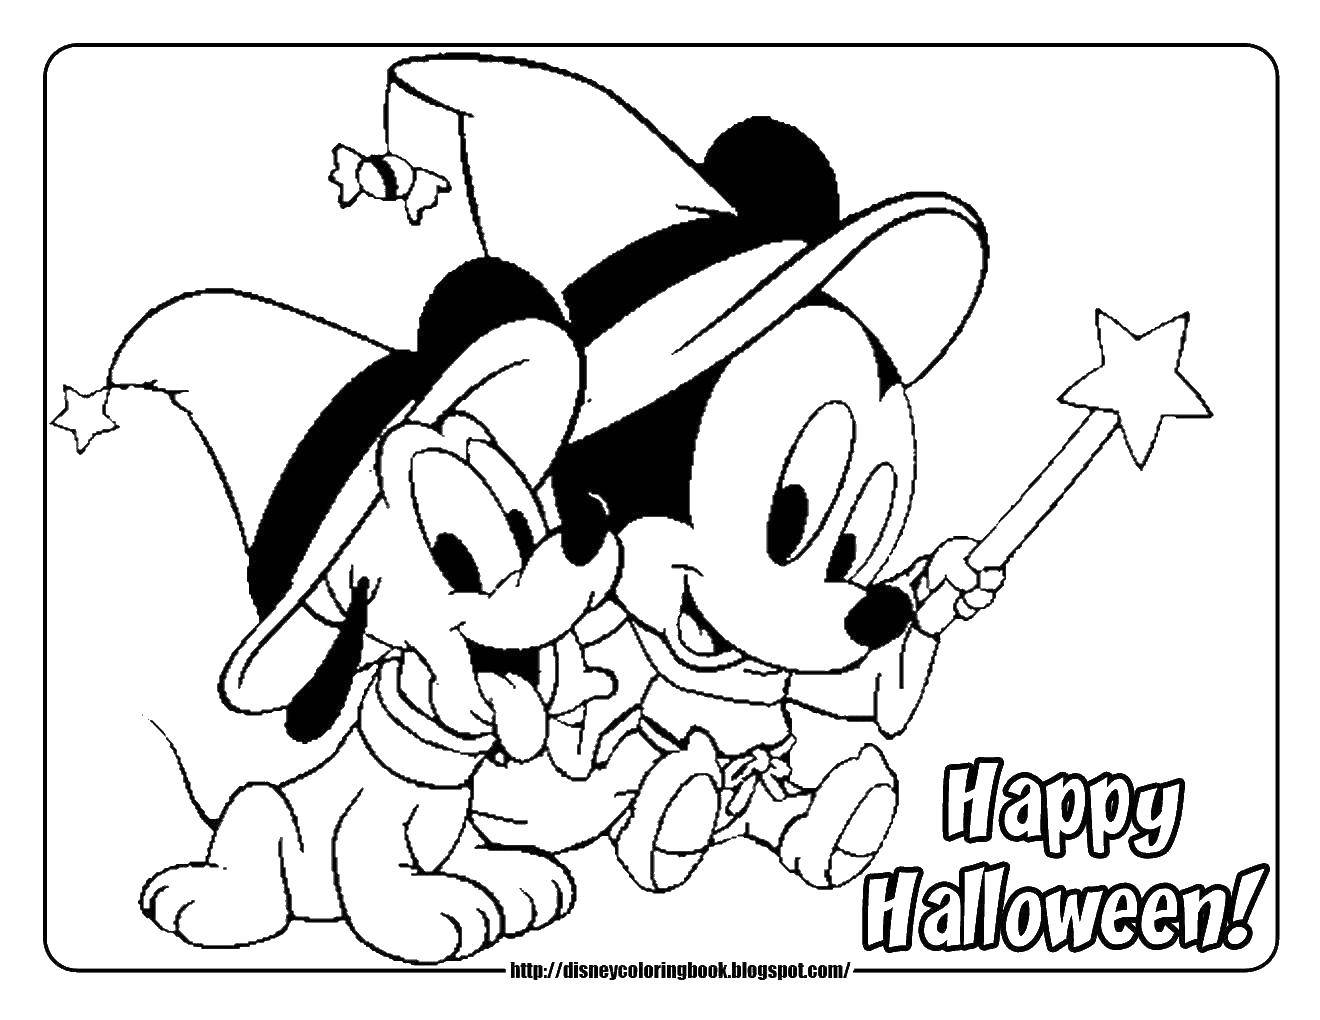 Coloring Happy Halloween. Category Halloween. Tags:  Halloween, Mickey Mouse.